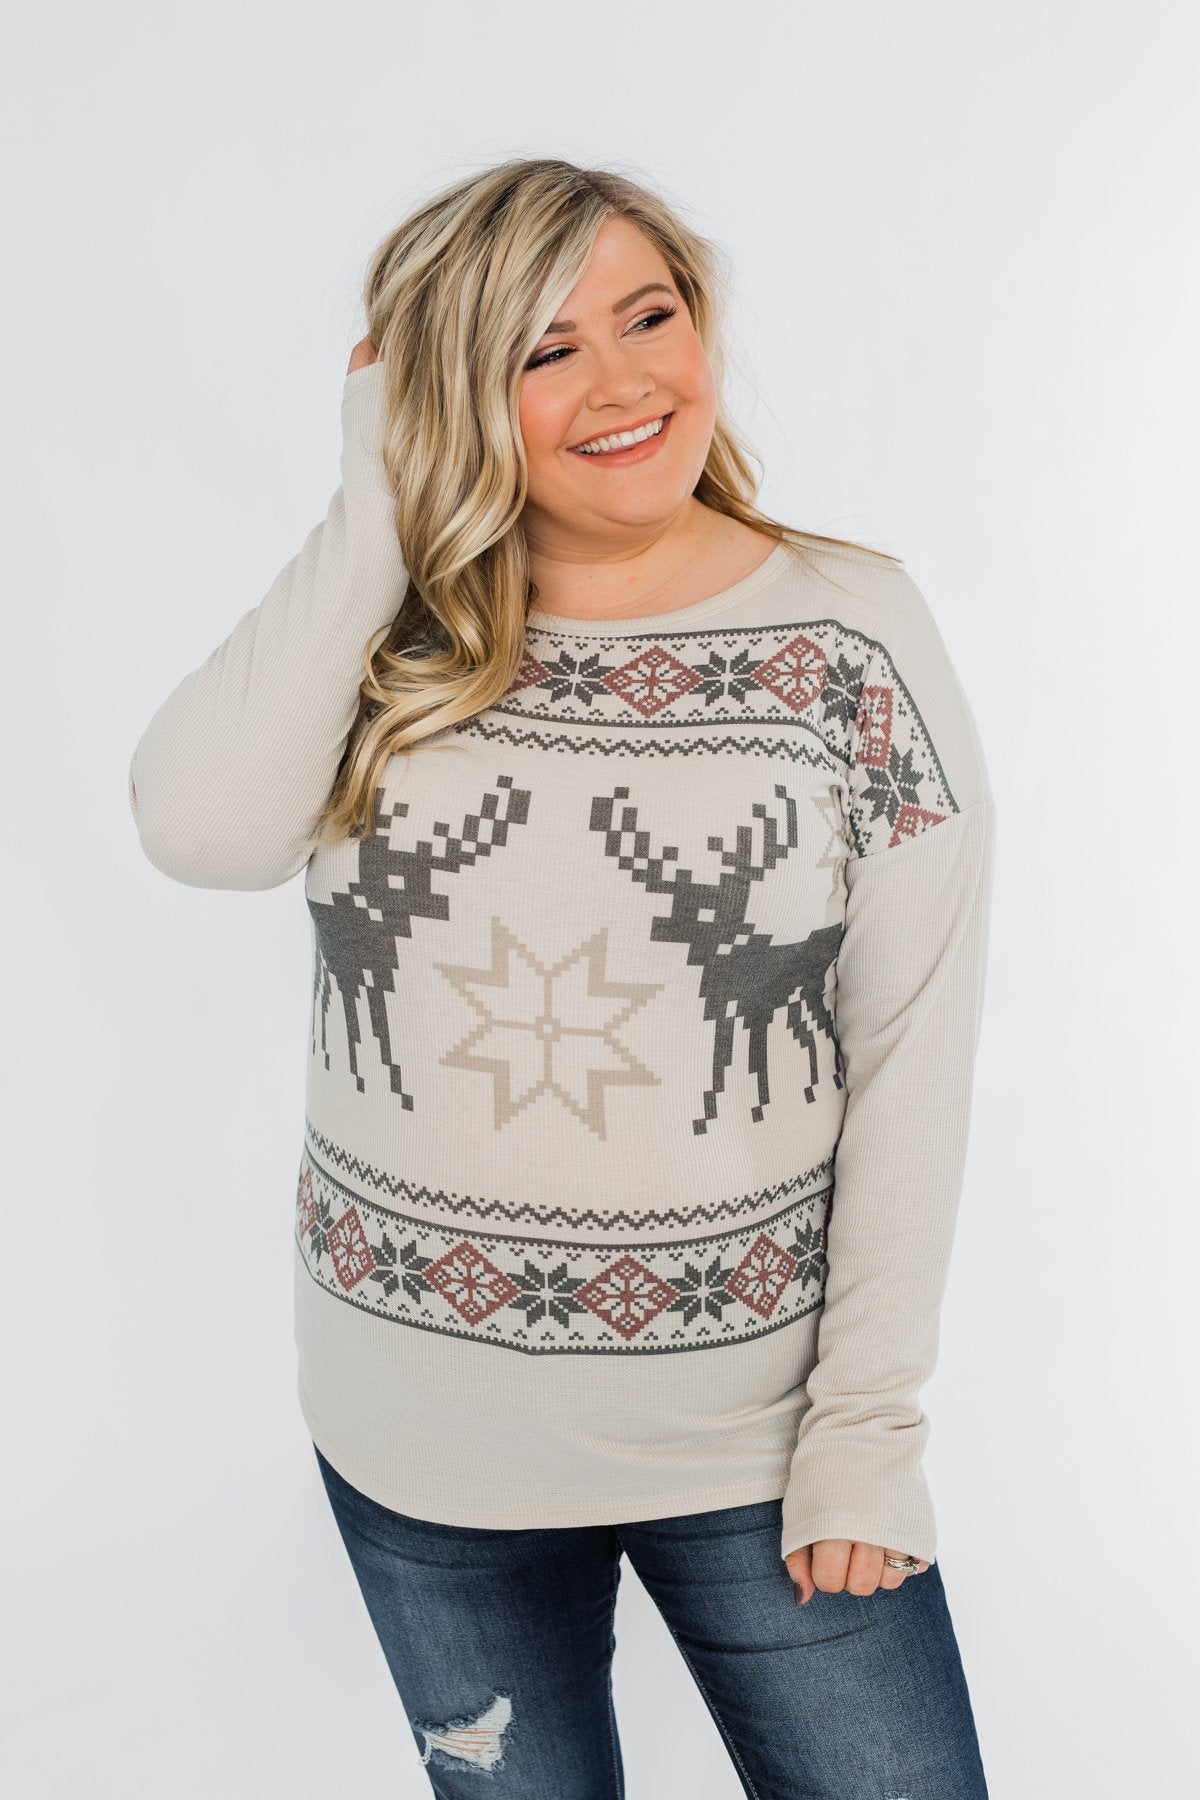 Dashing Through The Snow Thermal Top- Beige